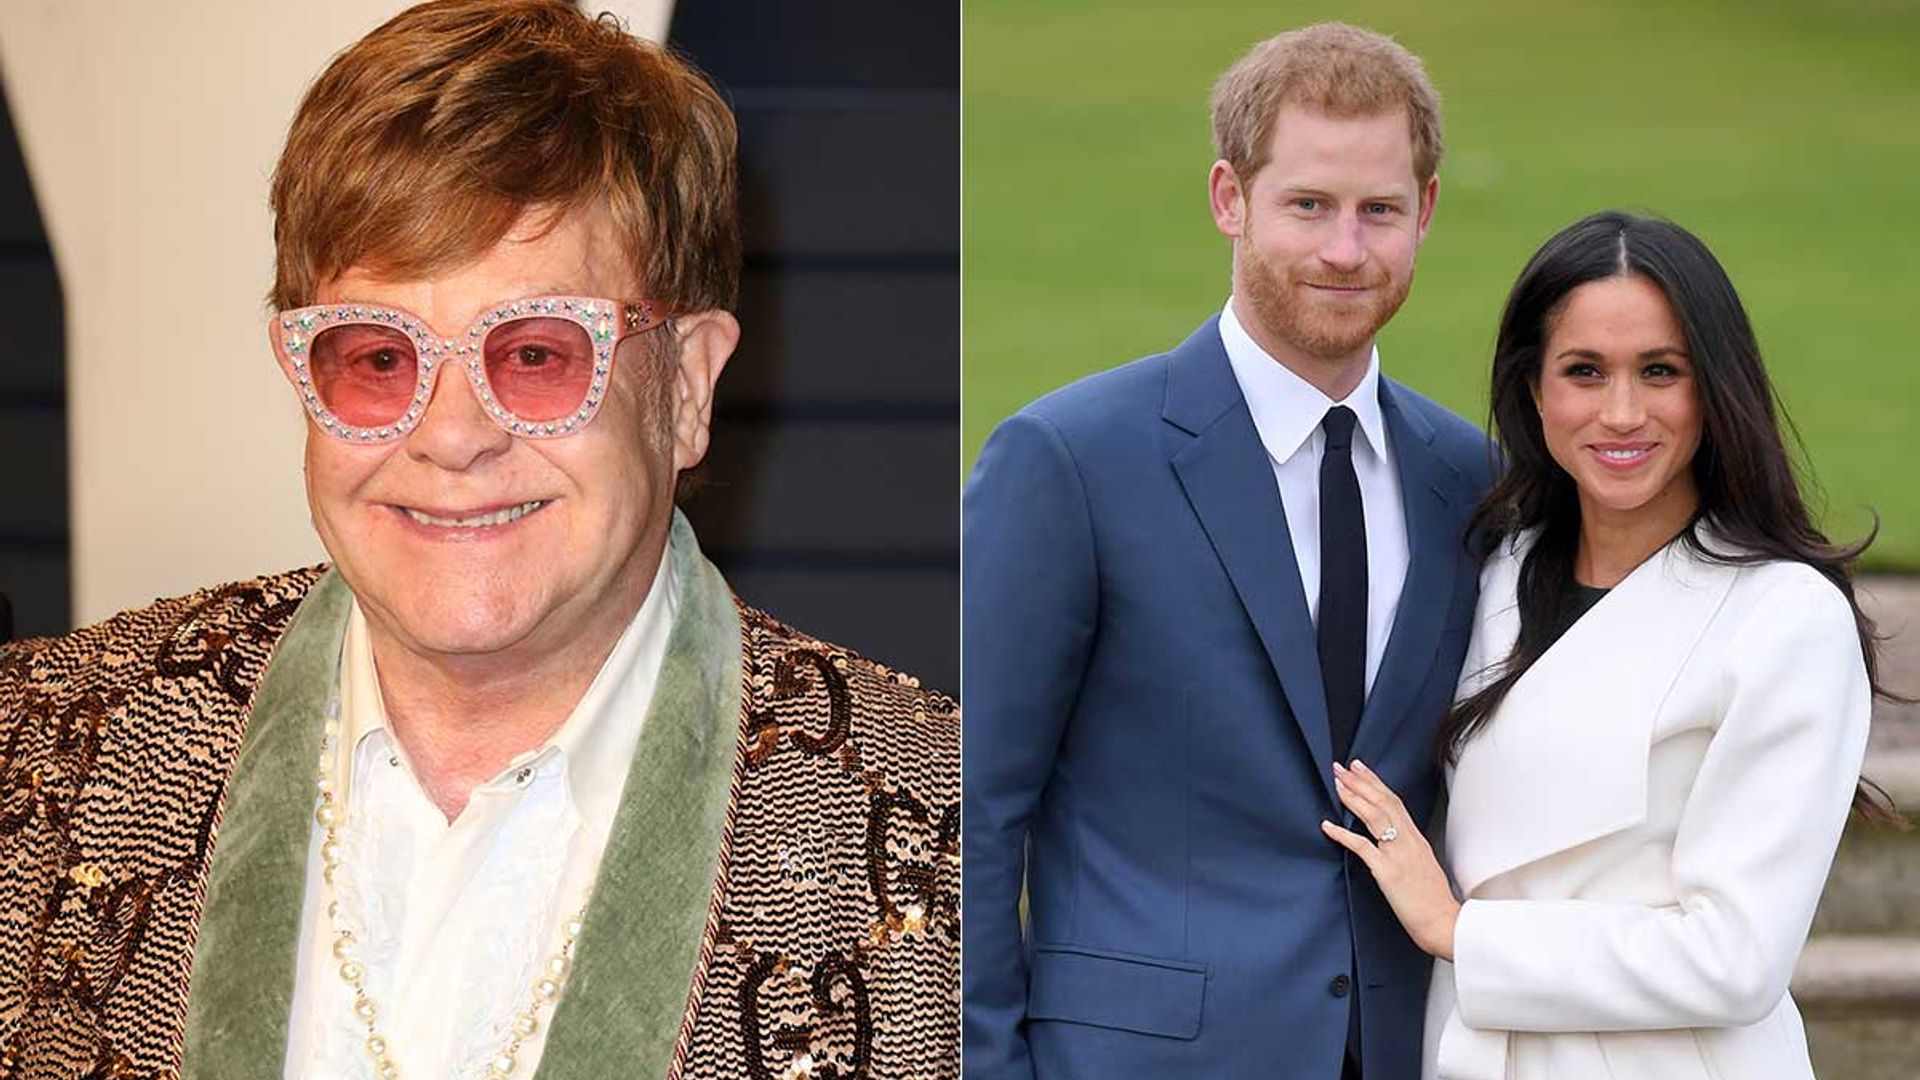 Elton John drops huge hint Meghan Markle will give birth imminently